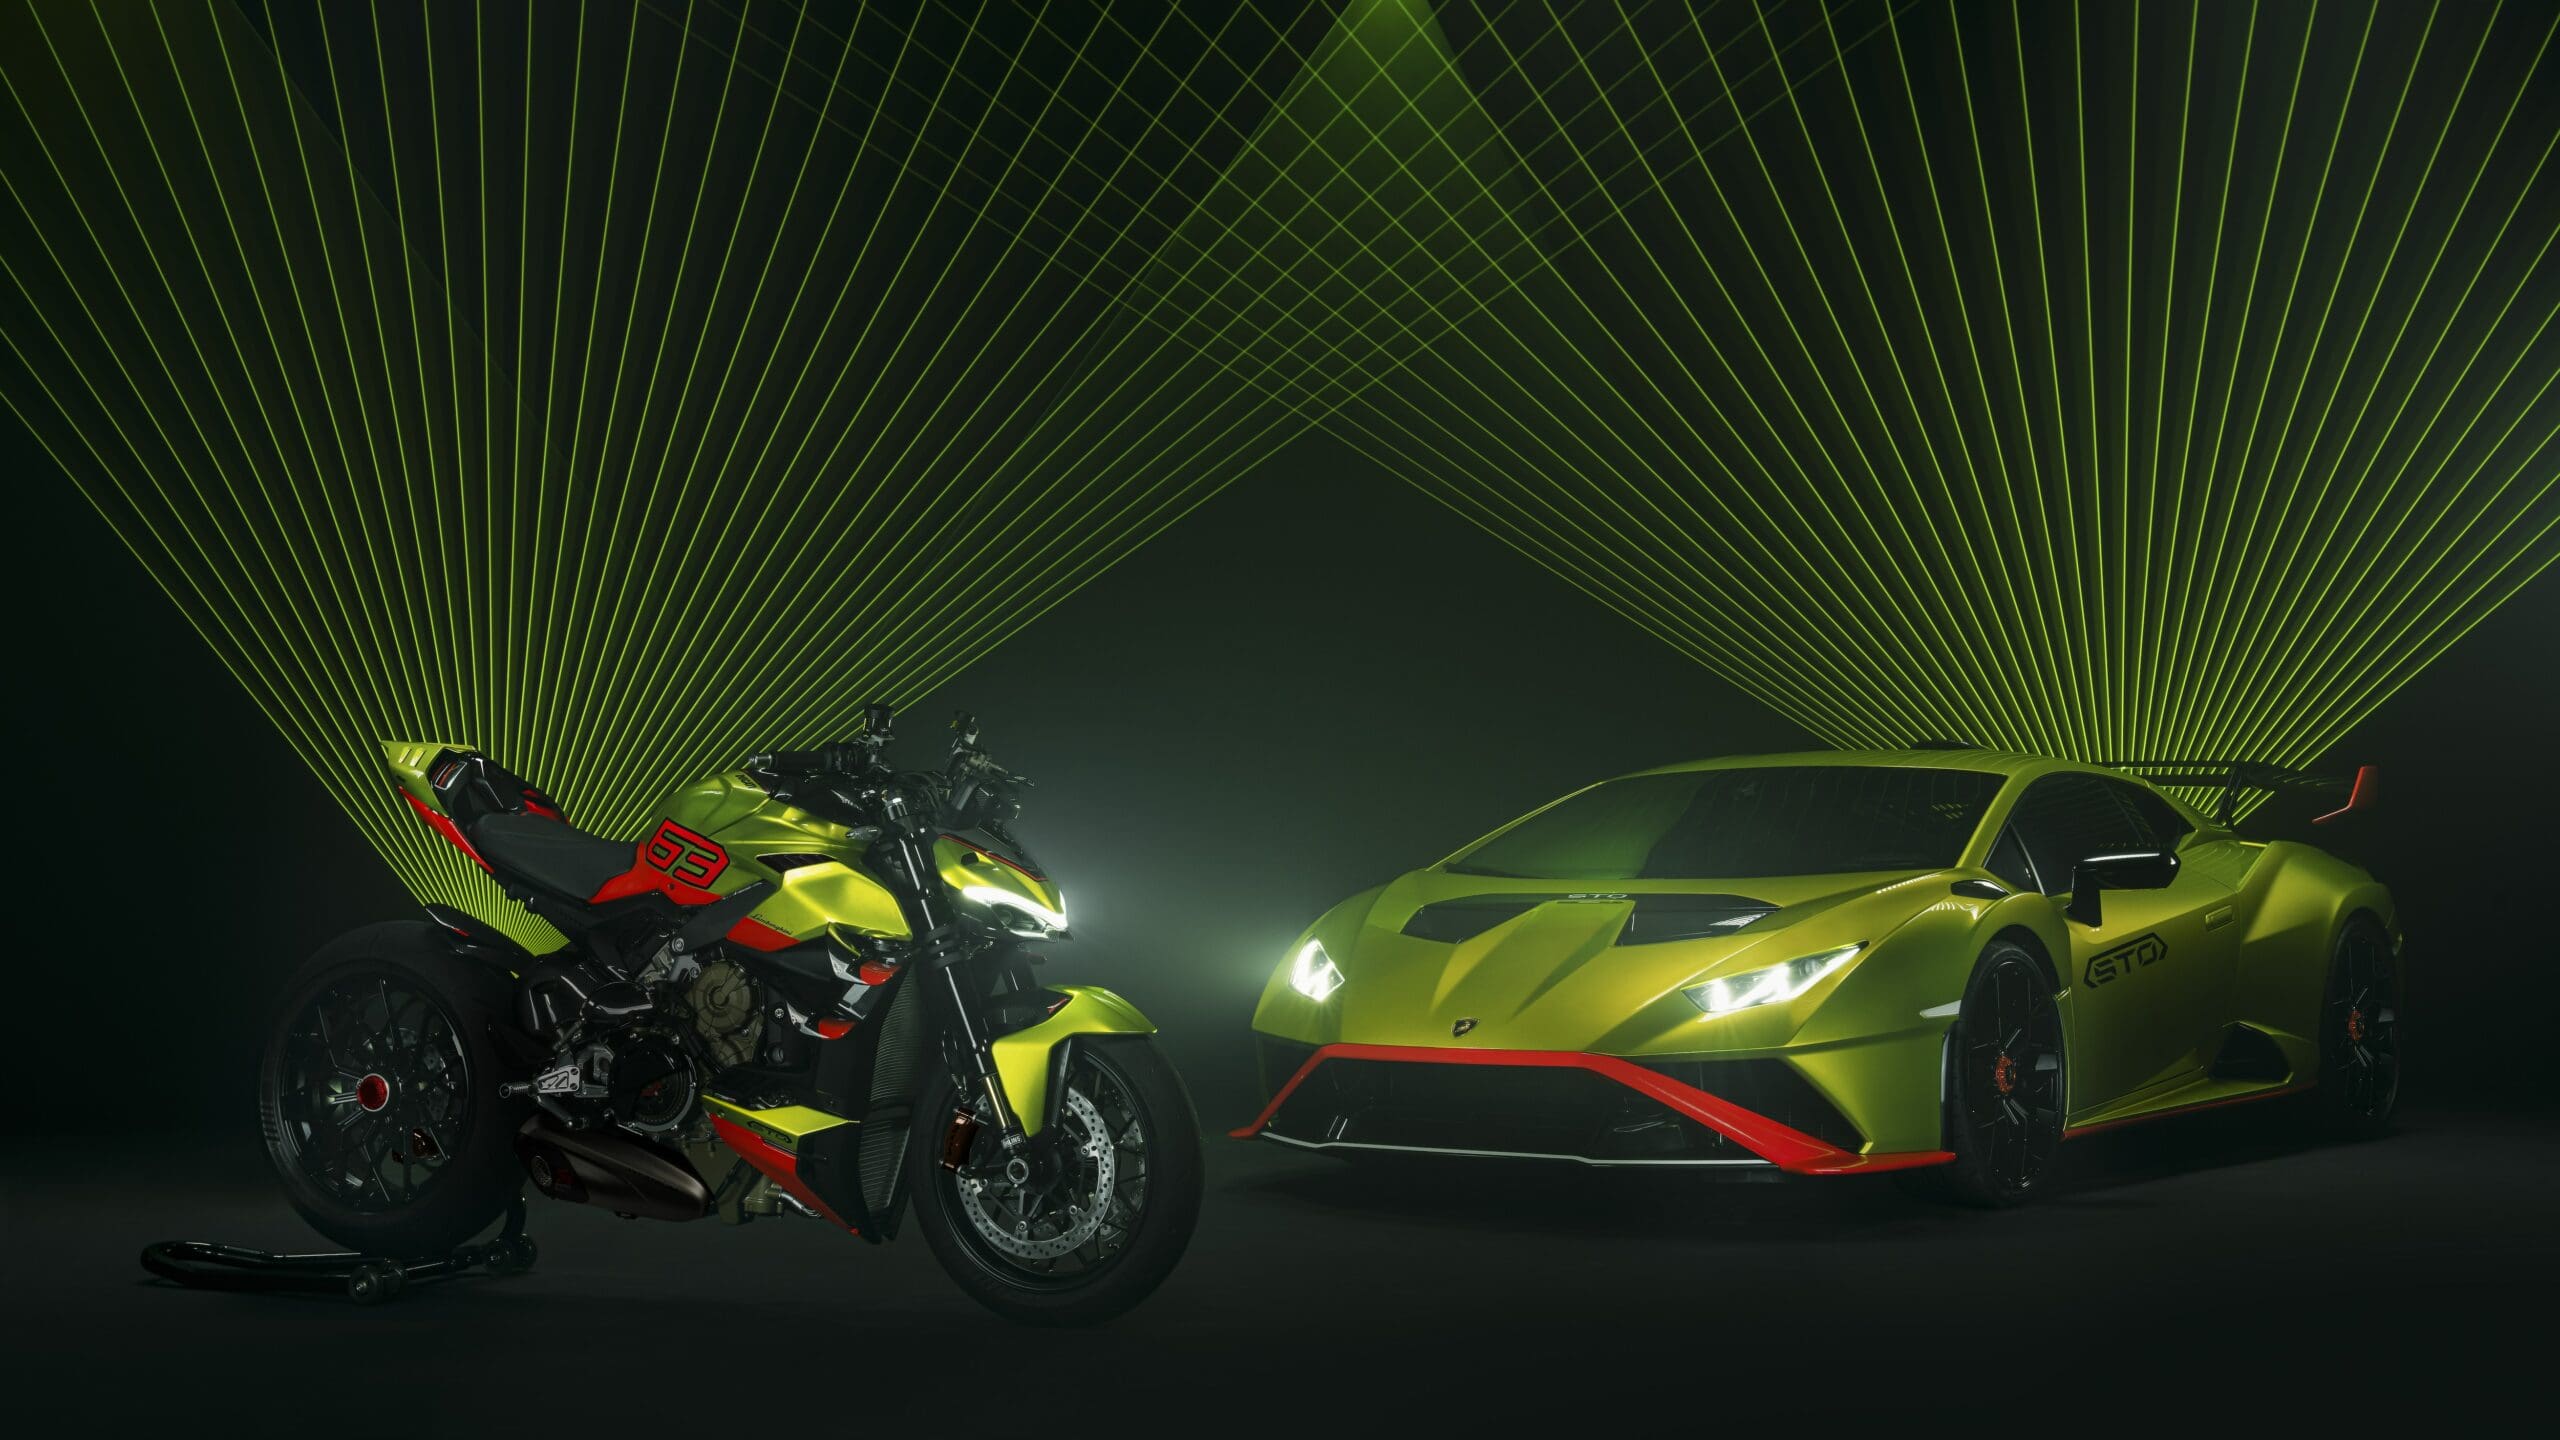 A view of Ducati's Streetfighter V4 and Lamborghini's Huracan STO, created in collaboration with Lamborghini. Media sourced from Ducati.